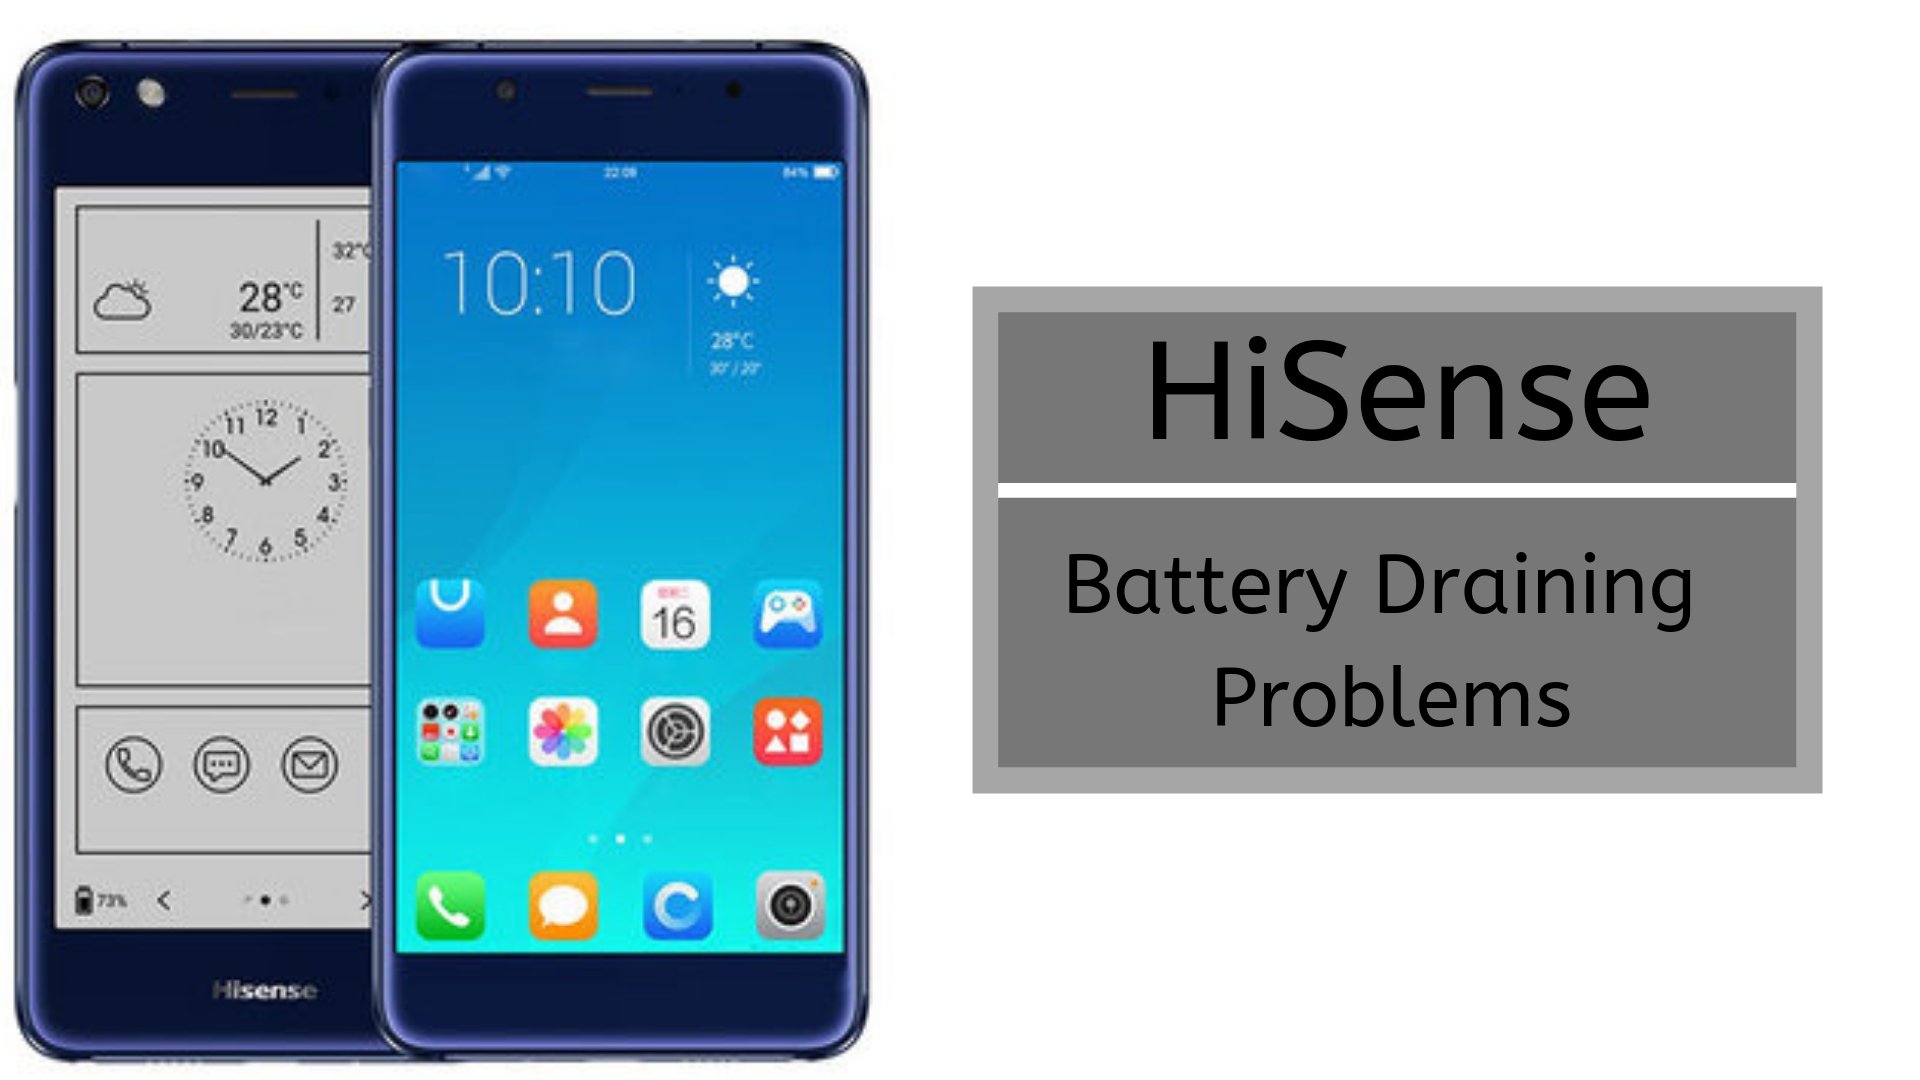 How Fix HiSense Battery Draining Problems - Troubleshooting and Fixes